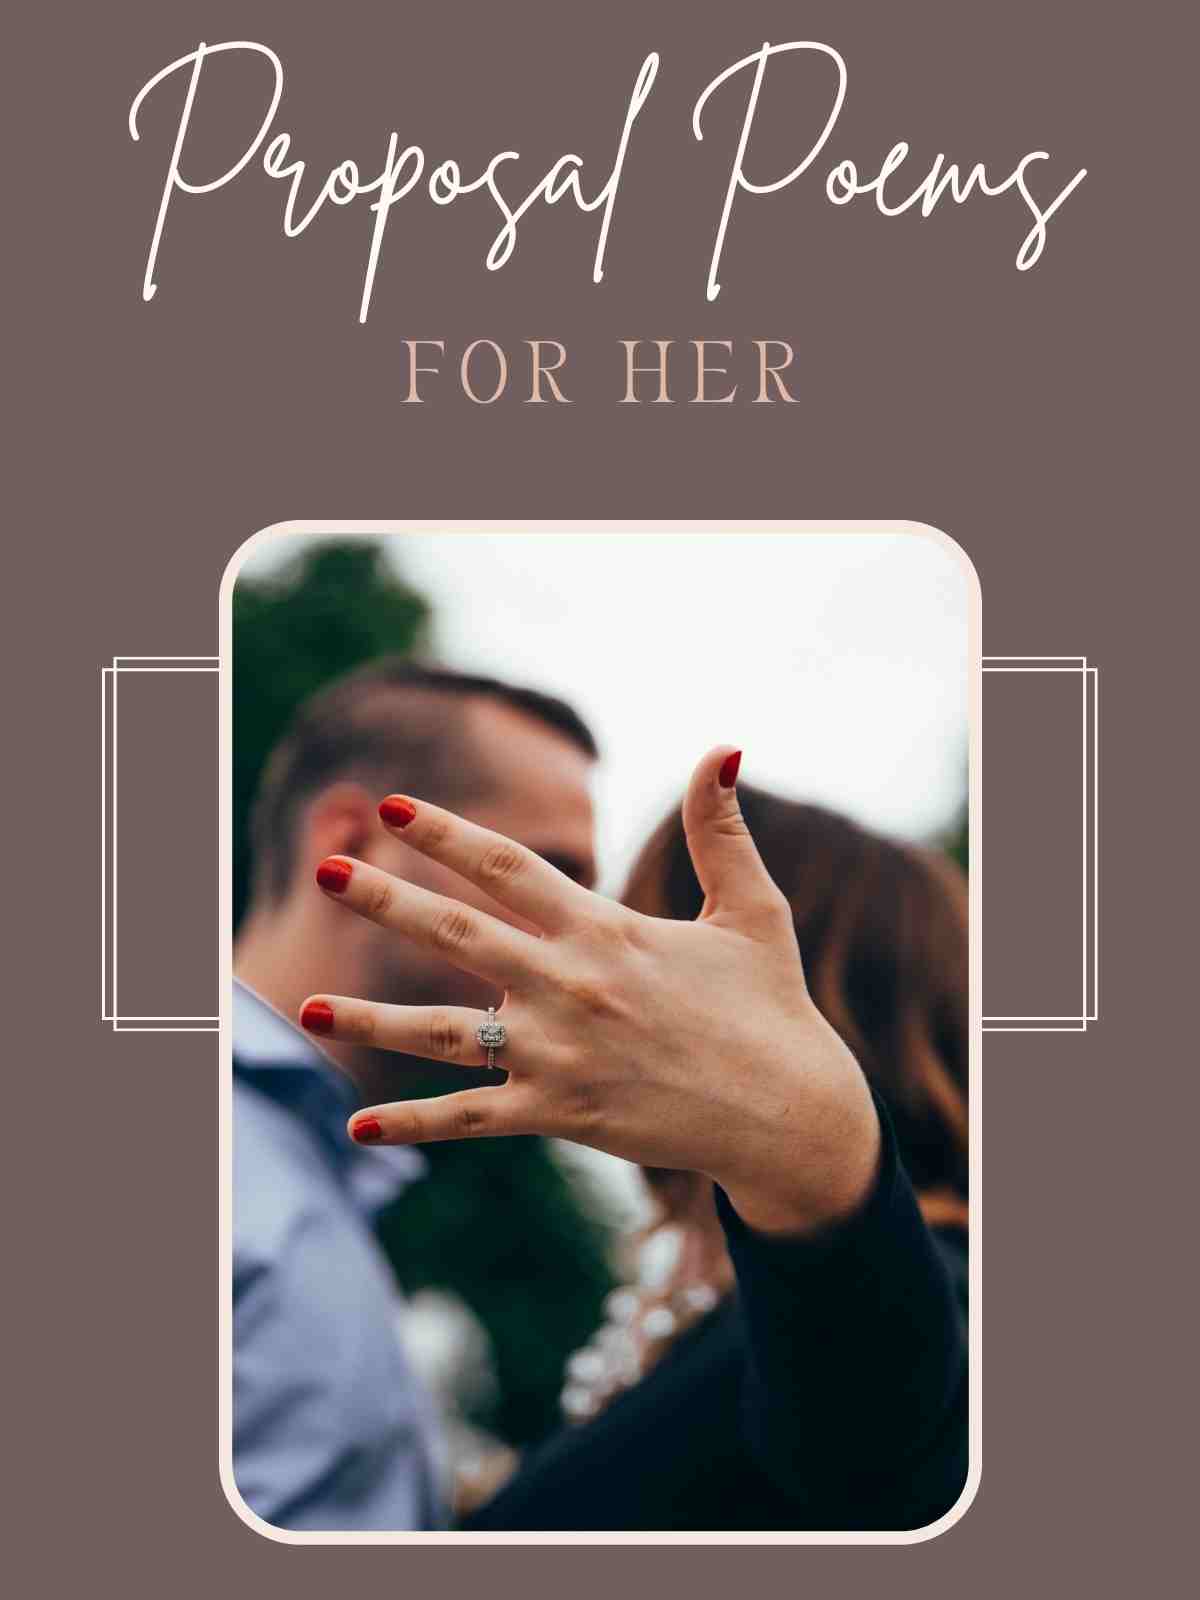 proposal poems for her